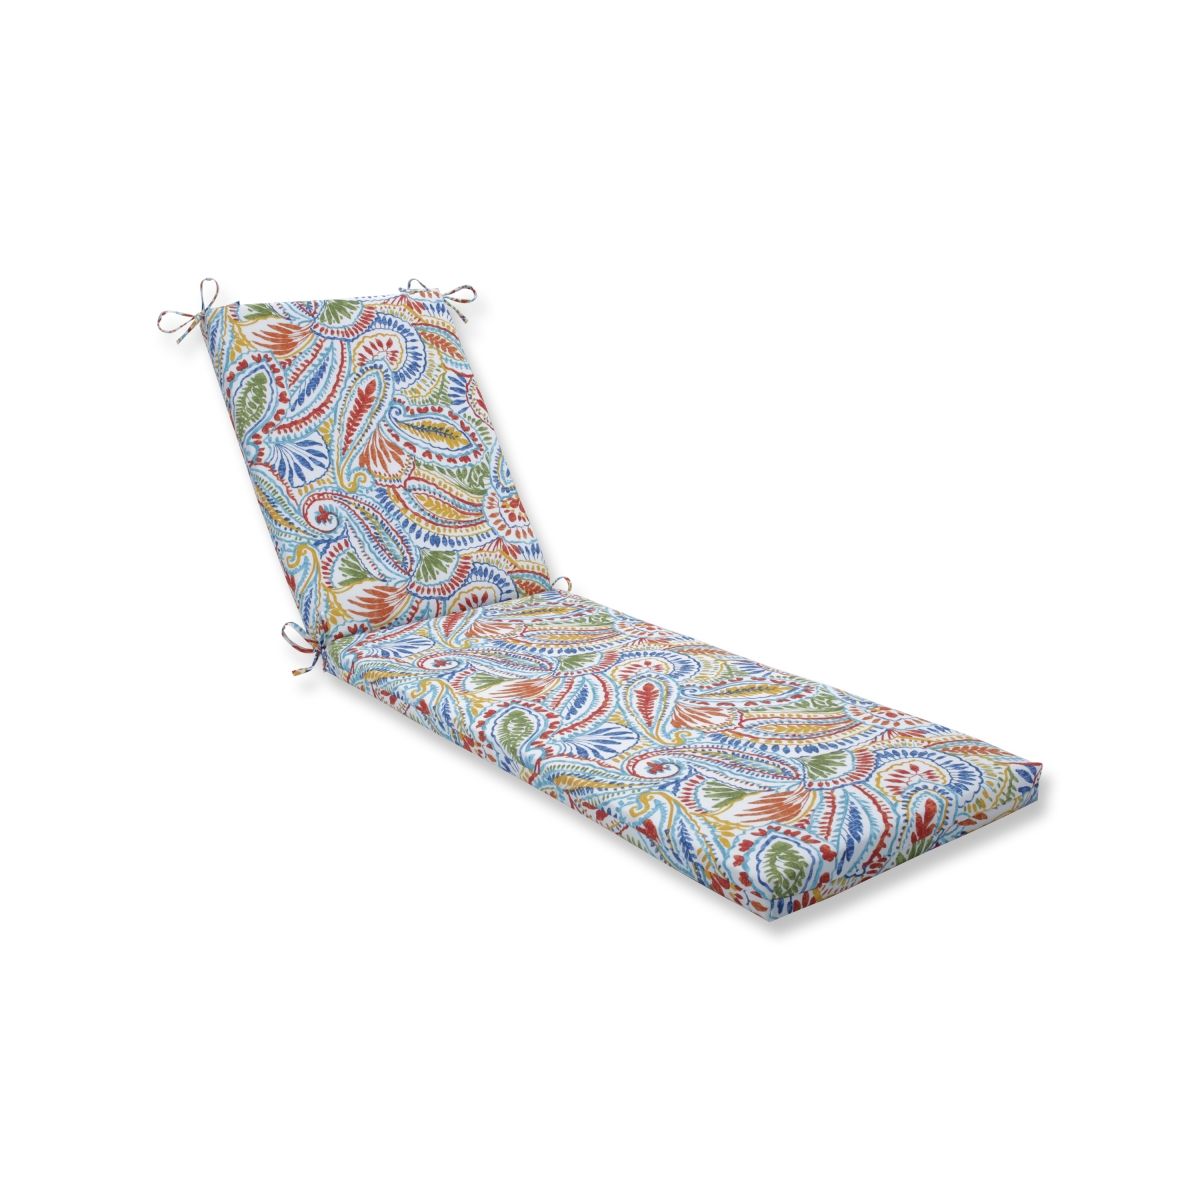 80 X 23 X 3 In. Outdoor & Indoor Ummi Multi Chaise Lounge Cushion, Multicolored